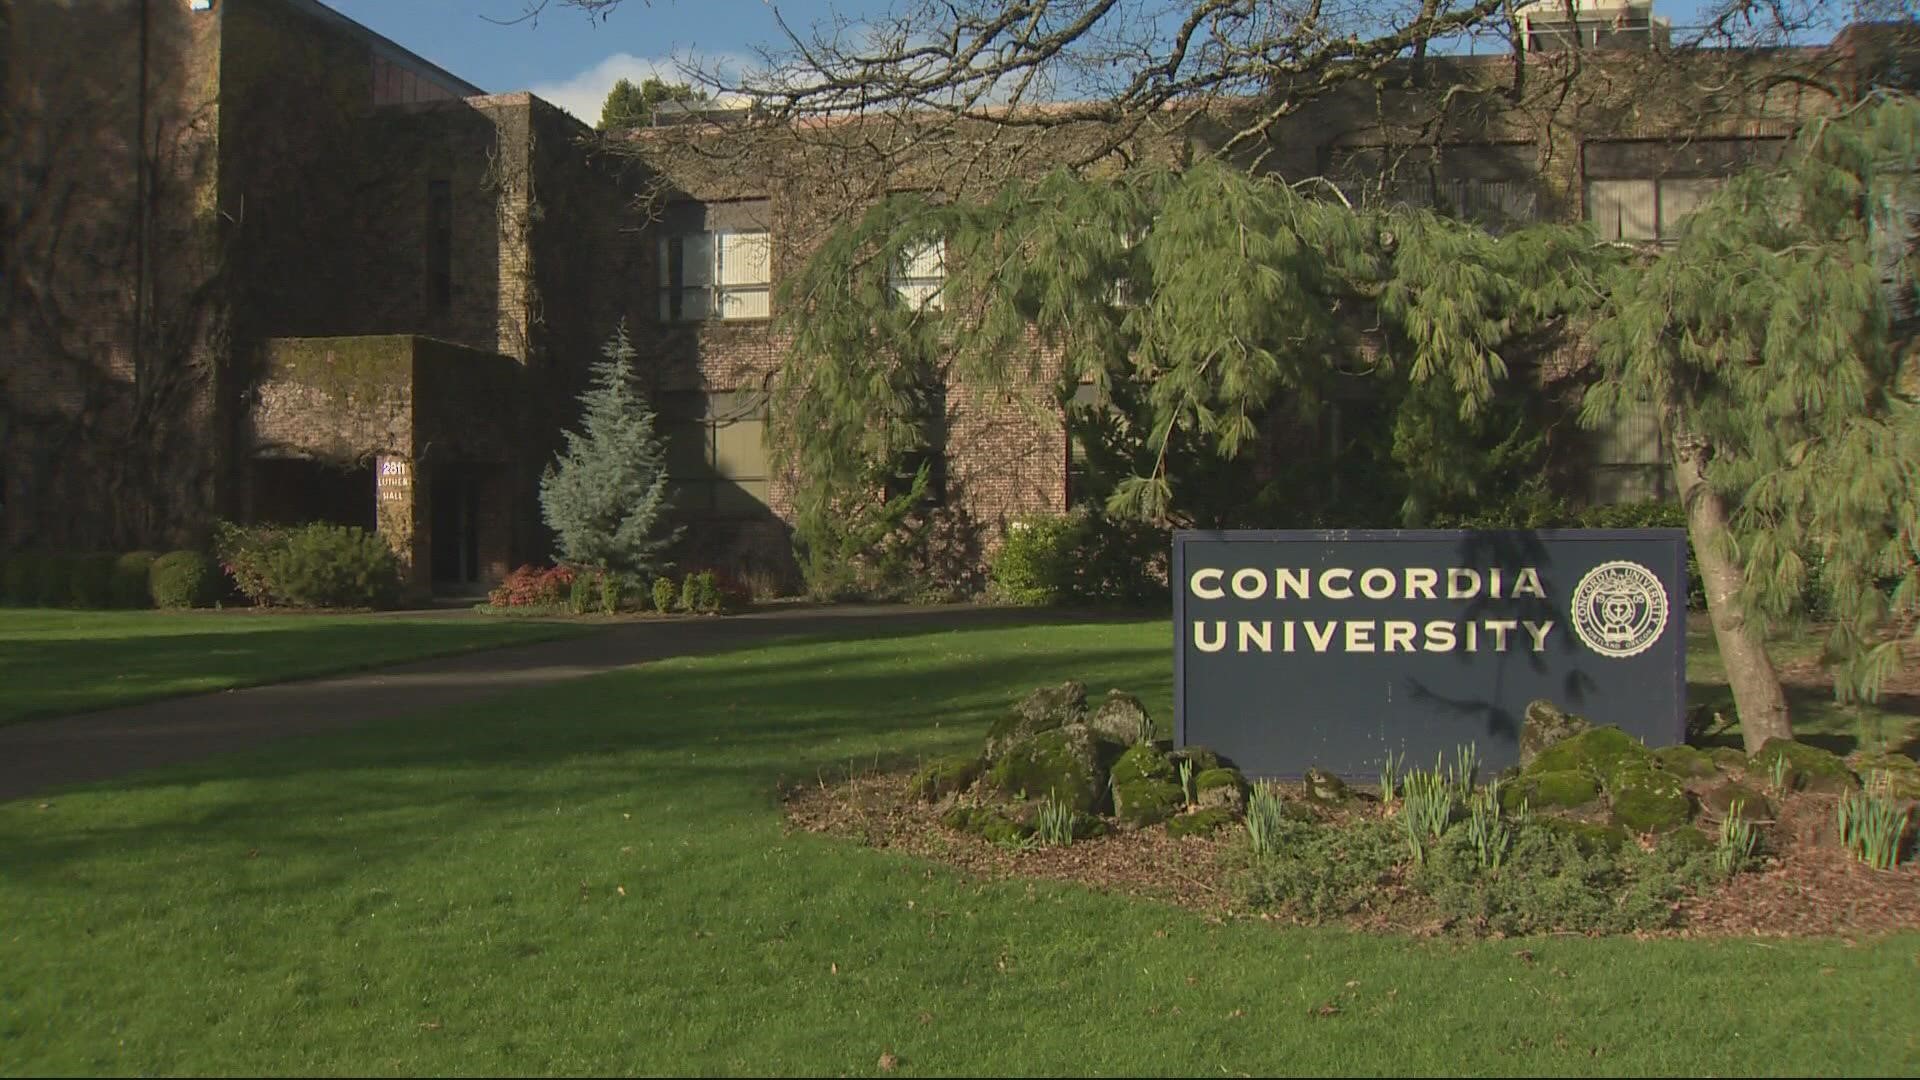 The University of Oregon's Portland campus will be relocated from Old Town to NE Portland. The university bought the former Concordia University campus last year.